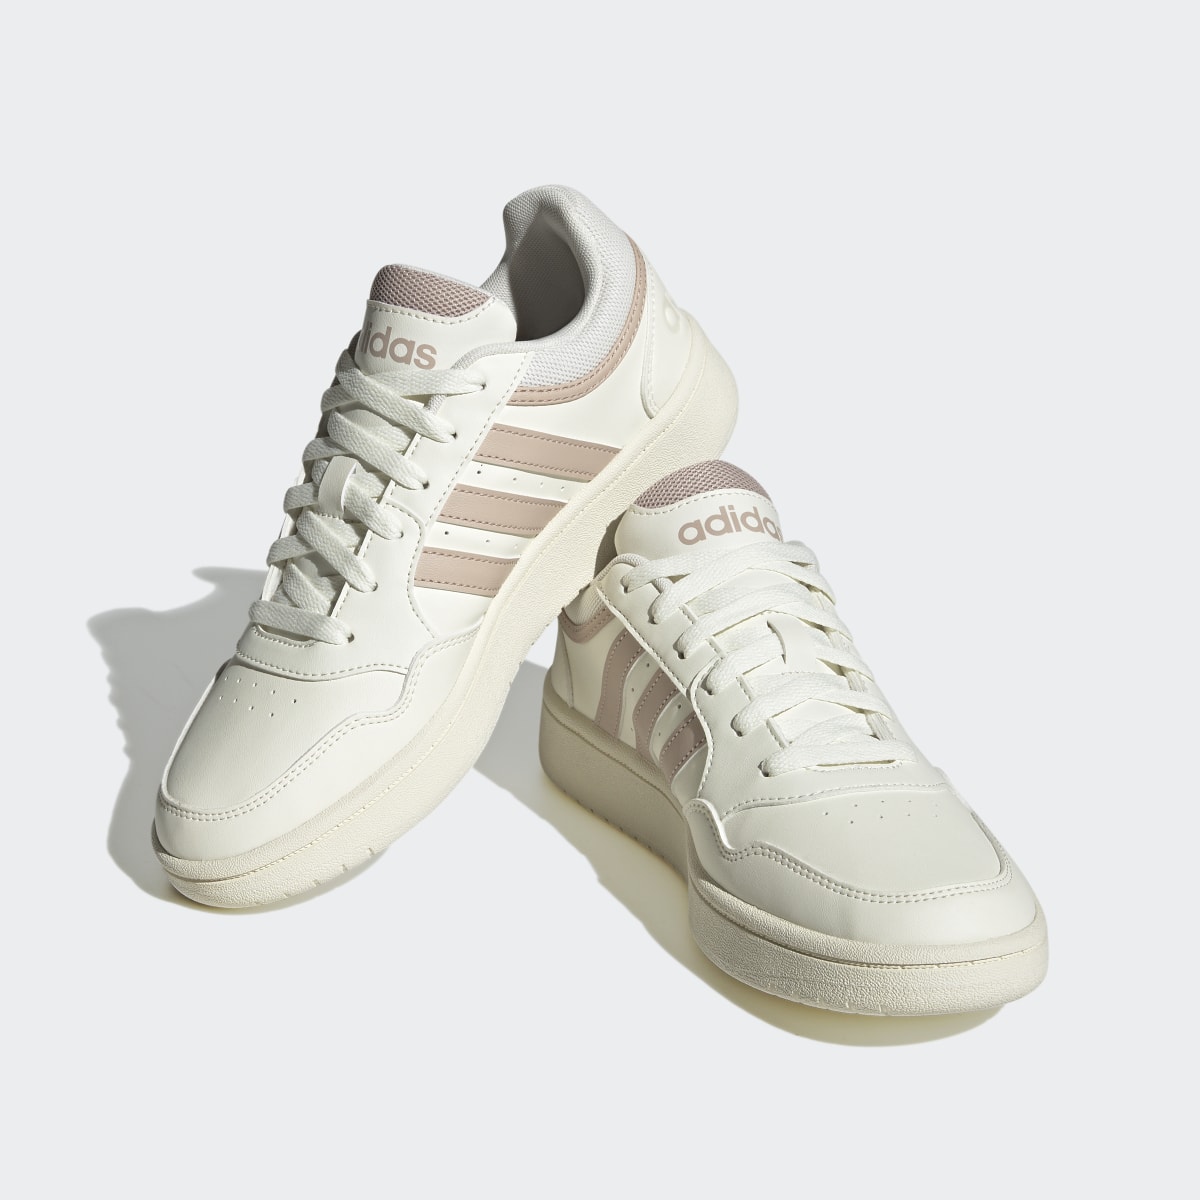 Adidas Hoops 3.0 Mid Lifestyle Basketball Low Shoes. 5